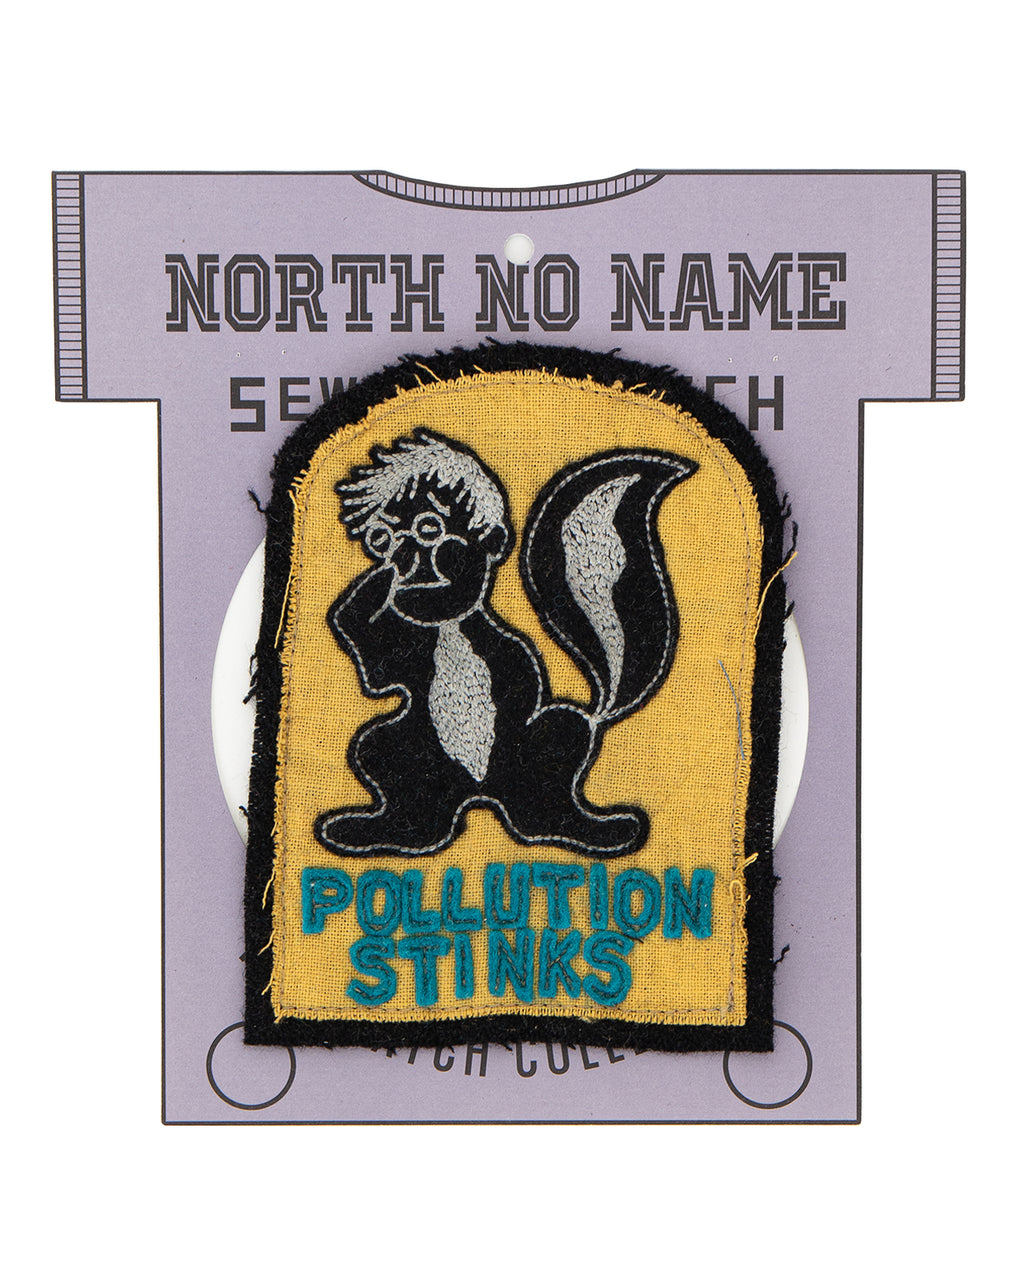 North No Name Felt Patch, Pollution Stinks